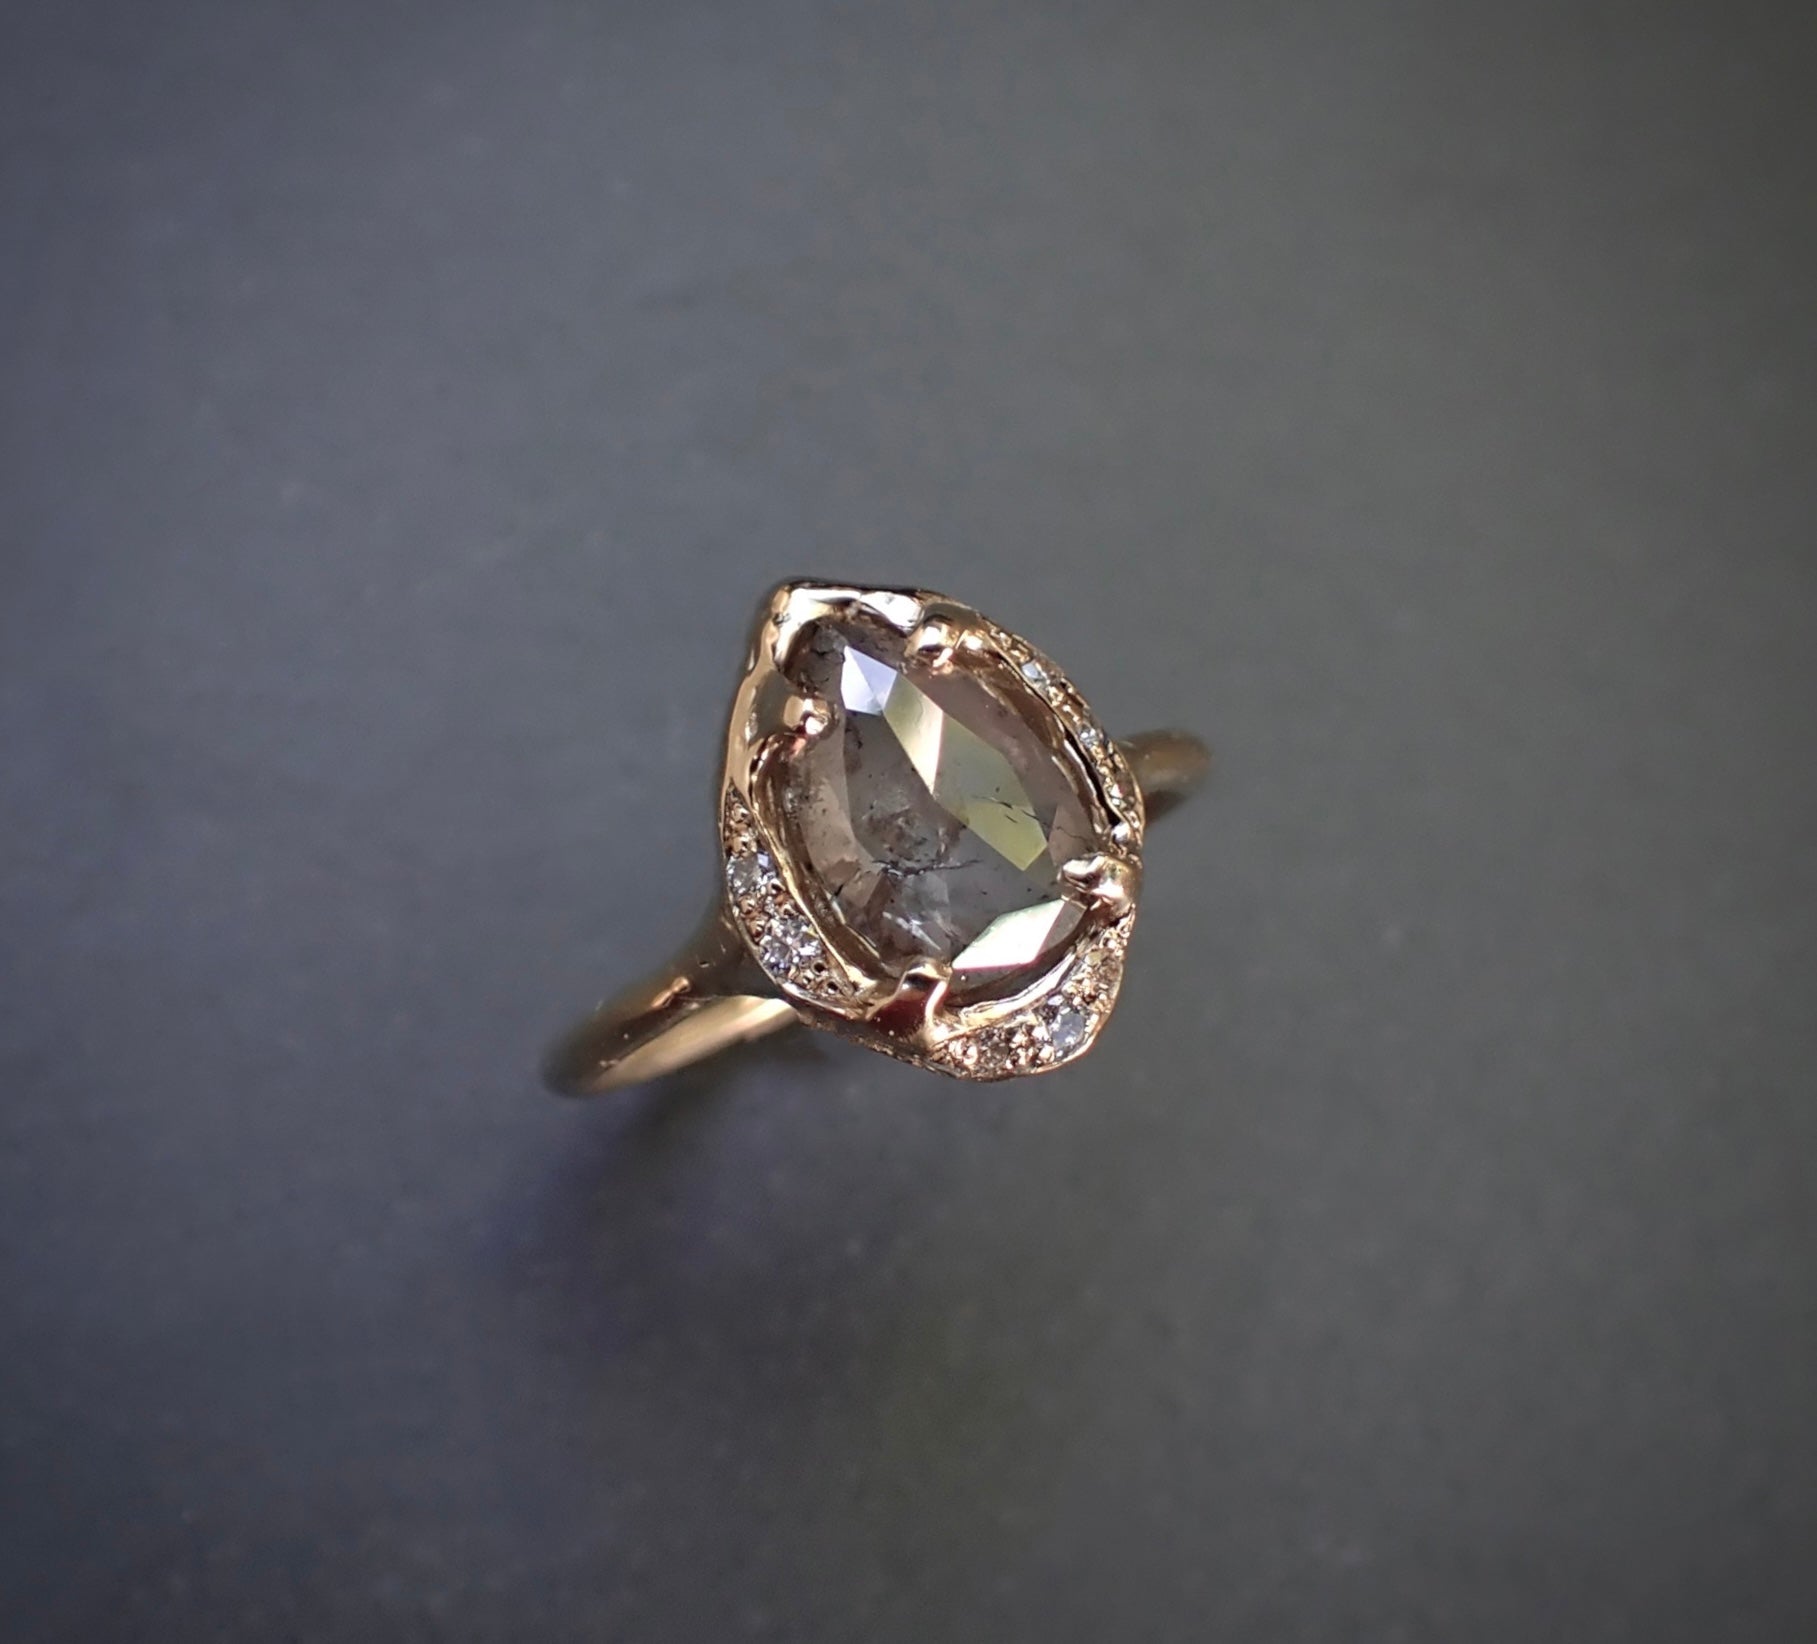 1.72ct Salt and Pepper Pear Diamond Ring in a Scattered Halo Setting